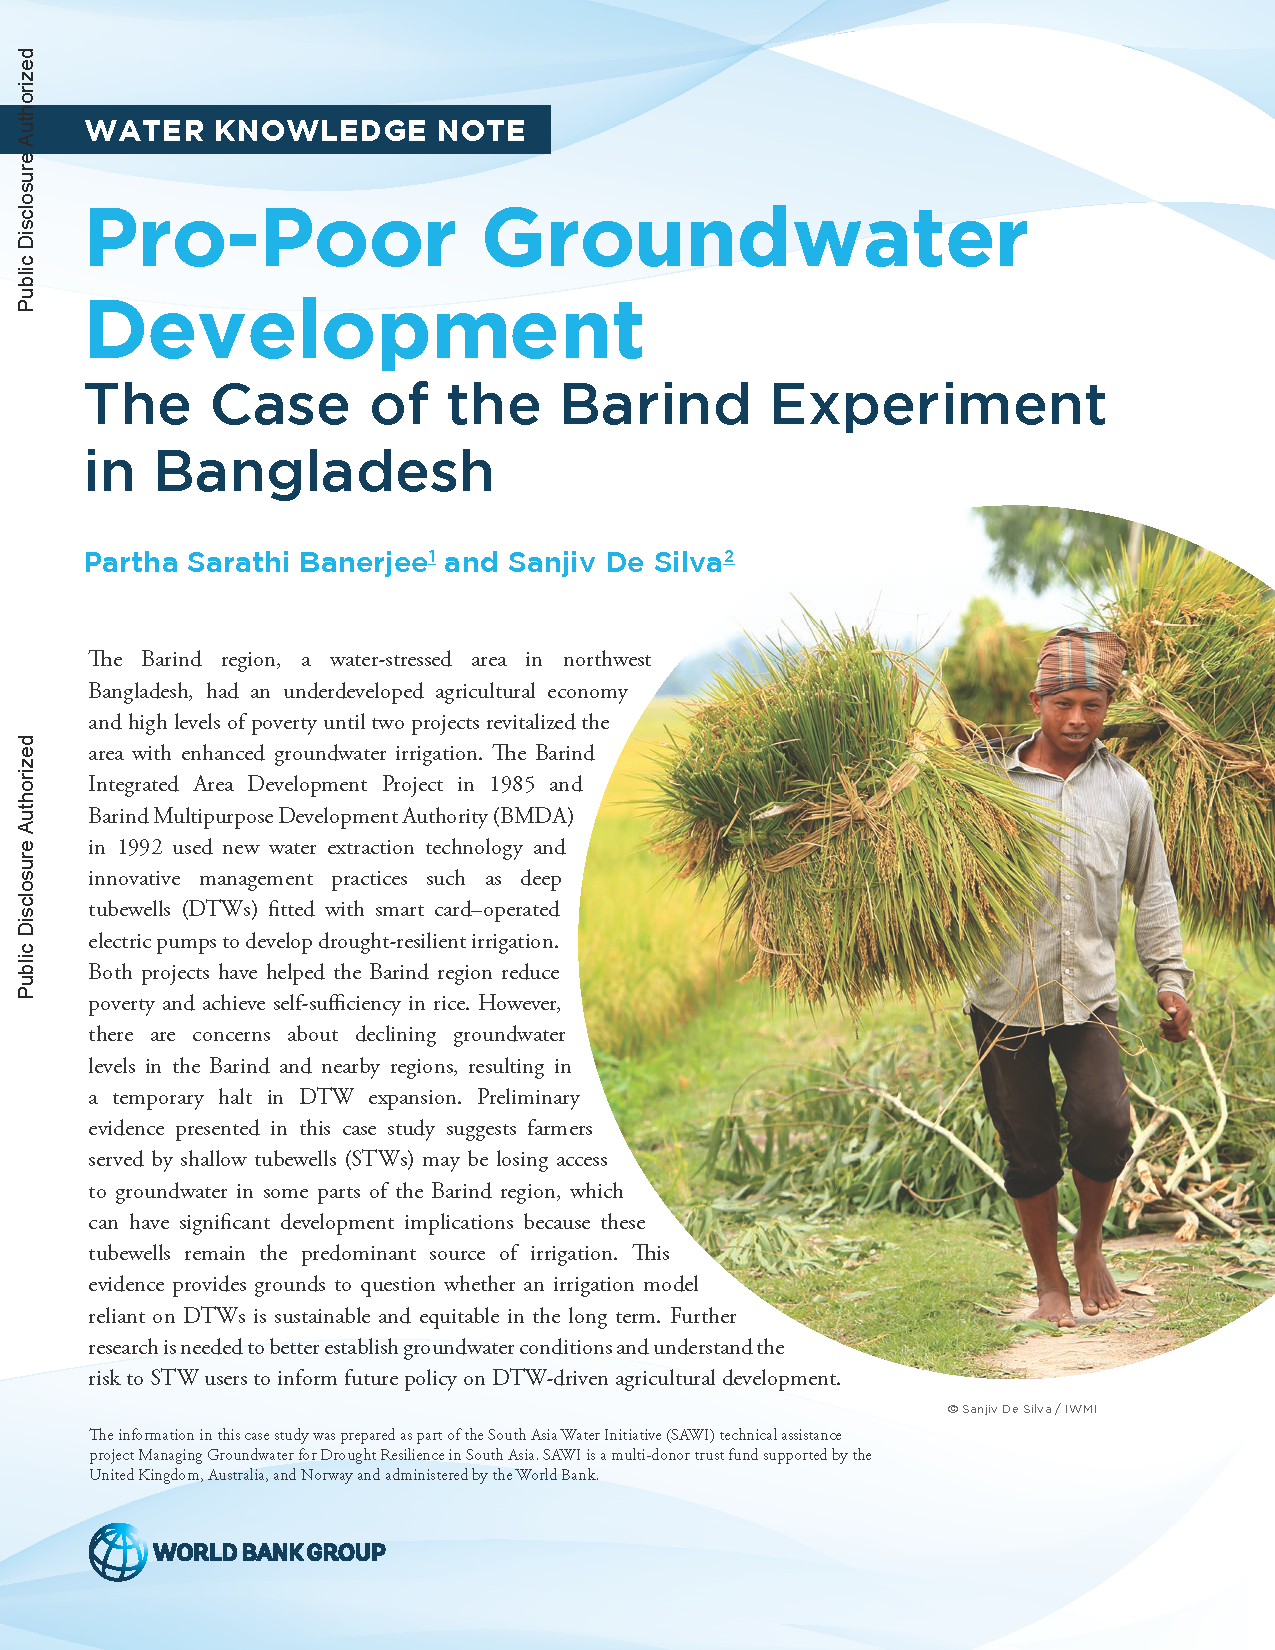 Cover-page for Pro-Poor Groundwater Development report